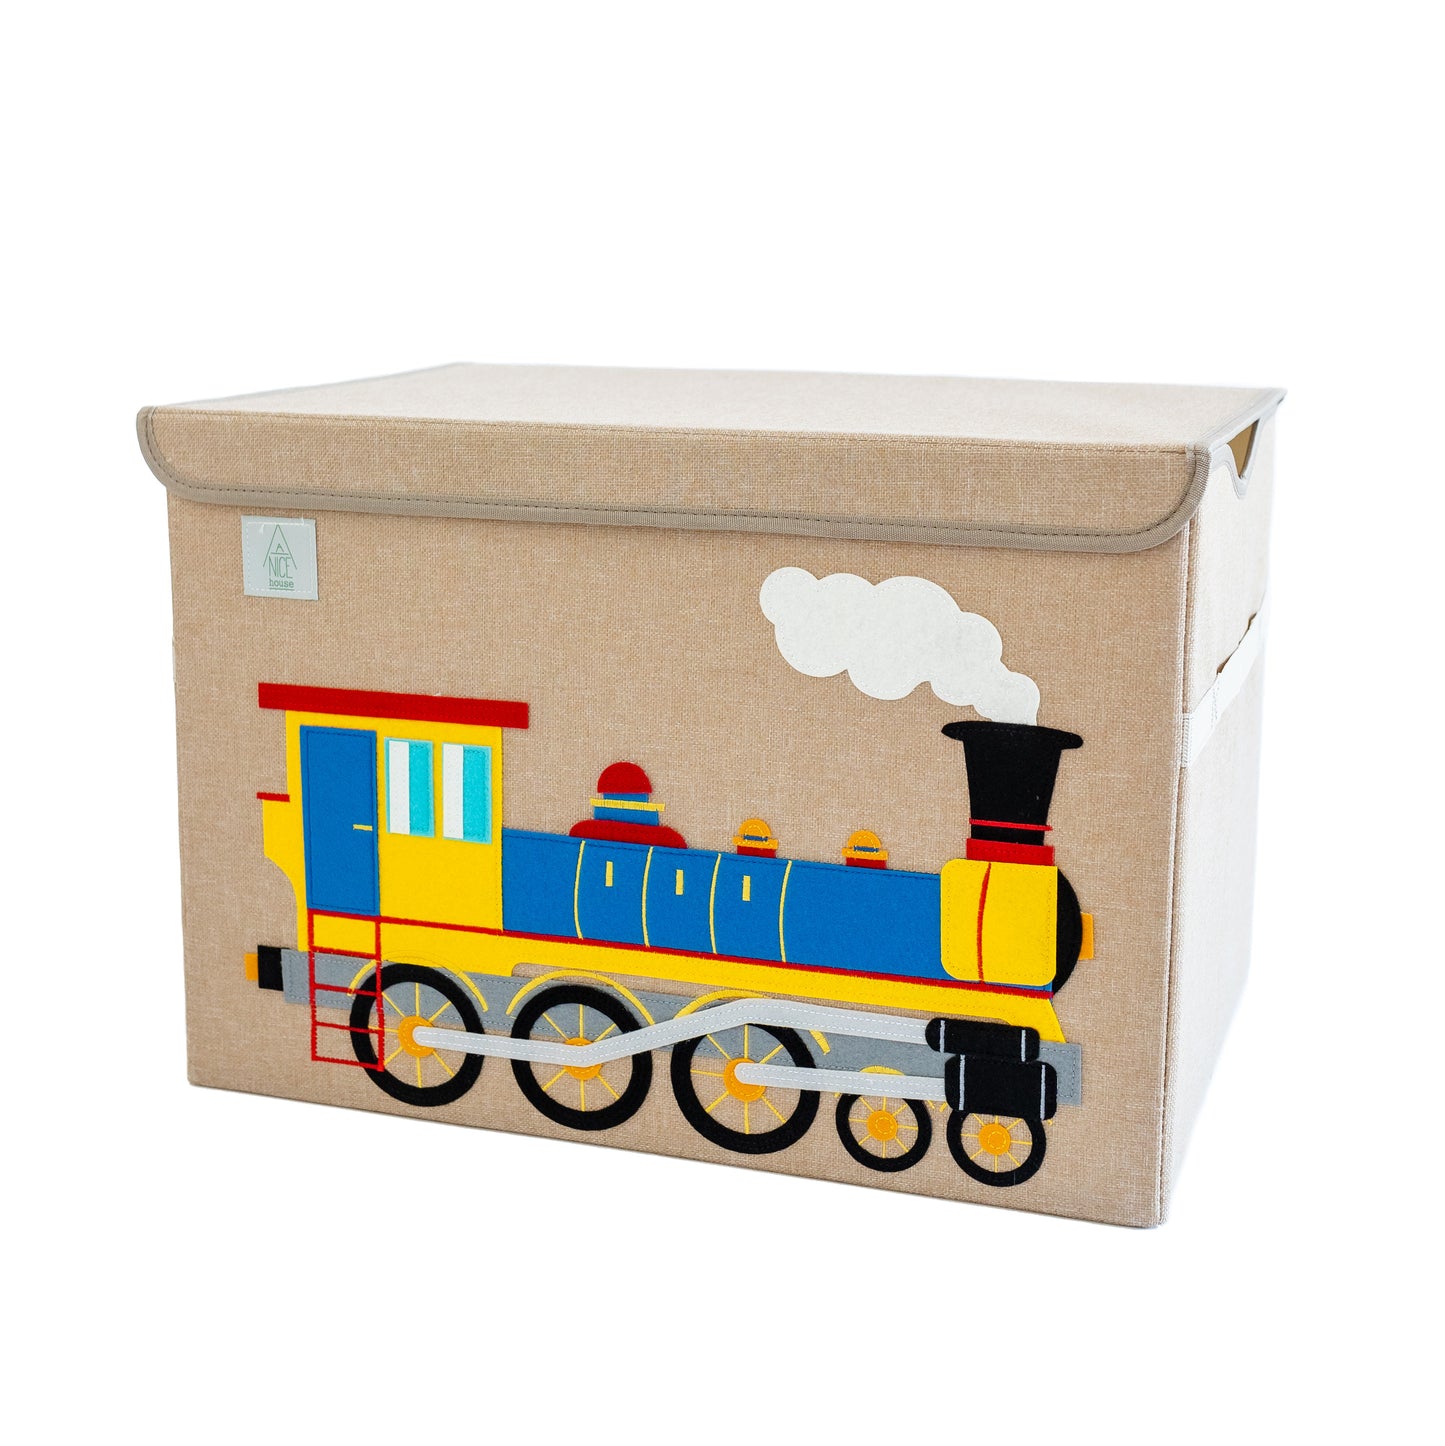 The Choo-Choo (Train Box): Appliquéd + Embroidered Collapsible Toy Box and Storage Box